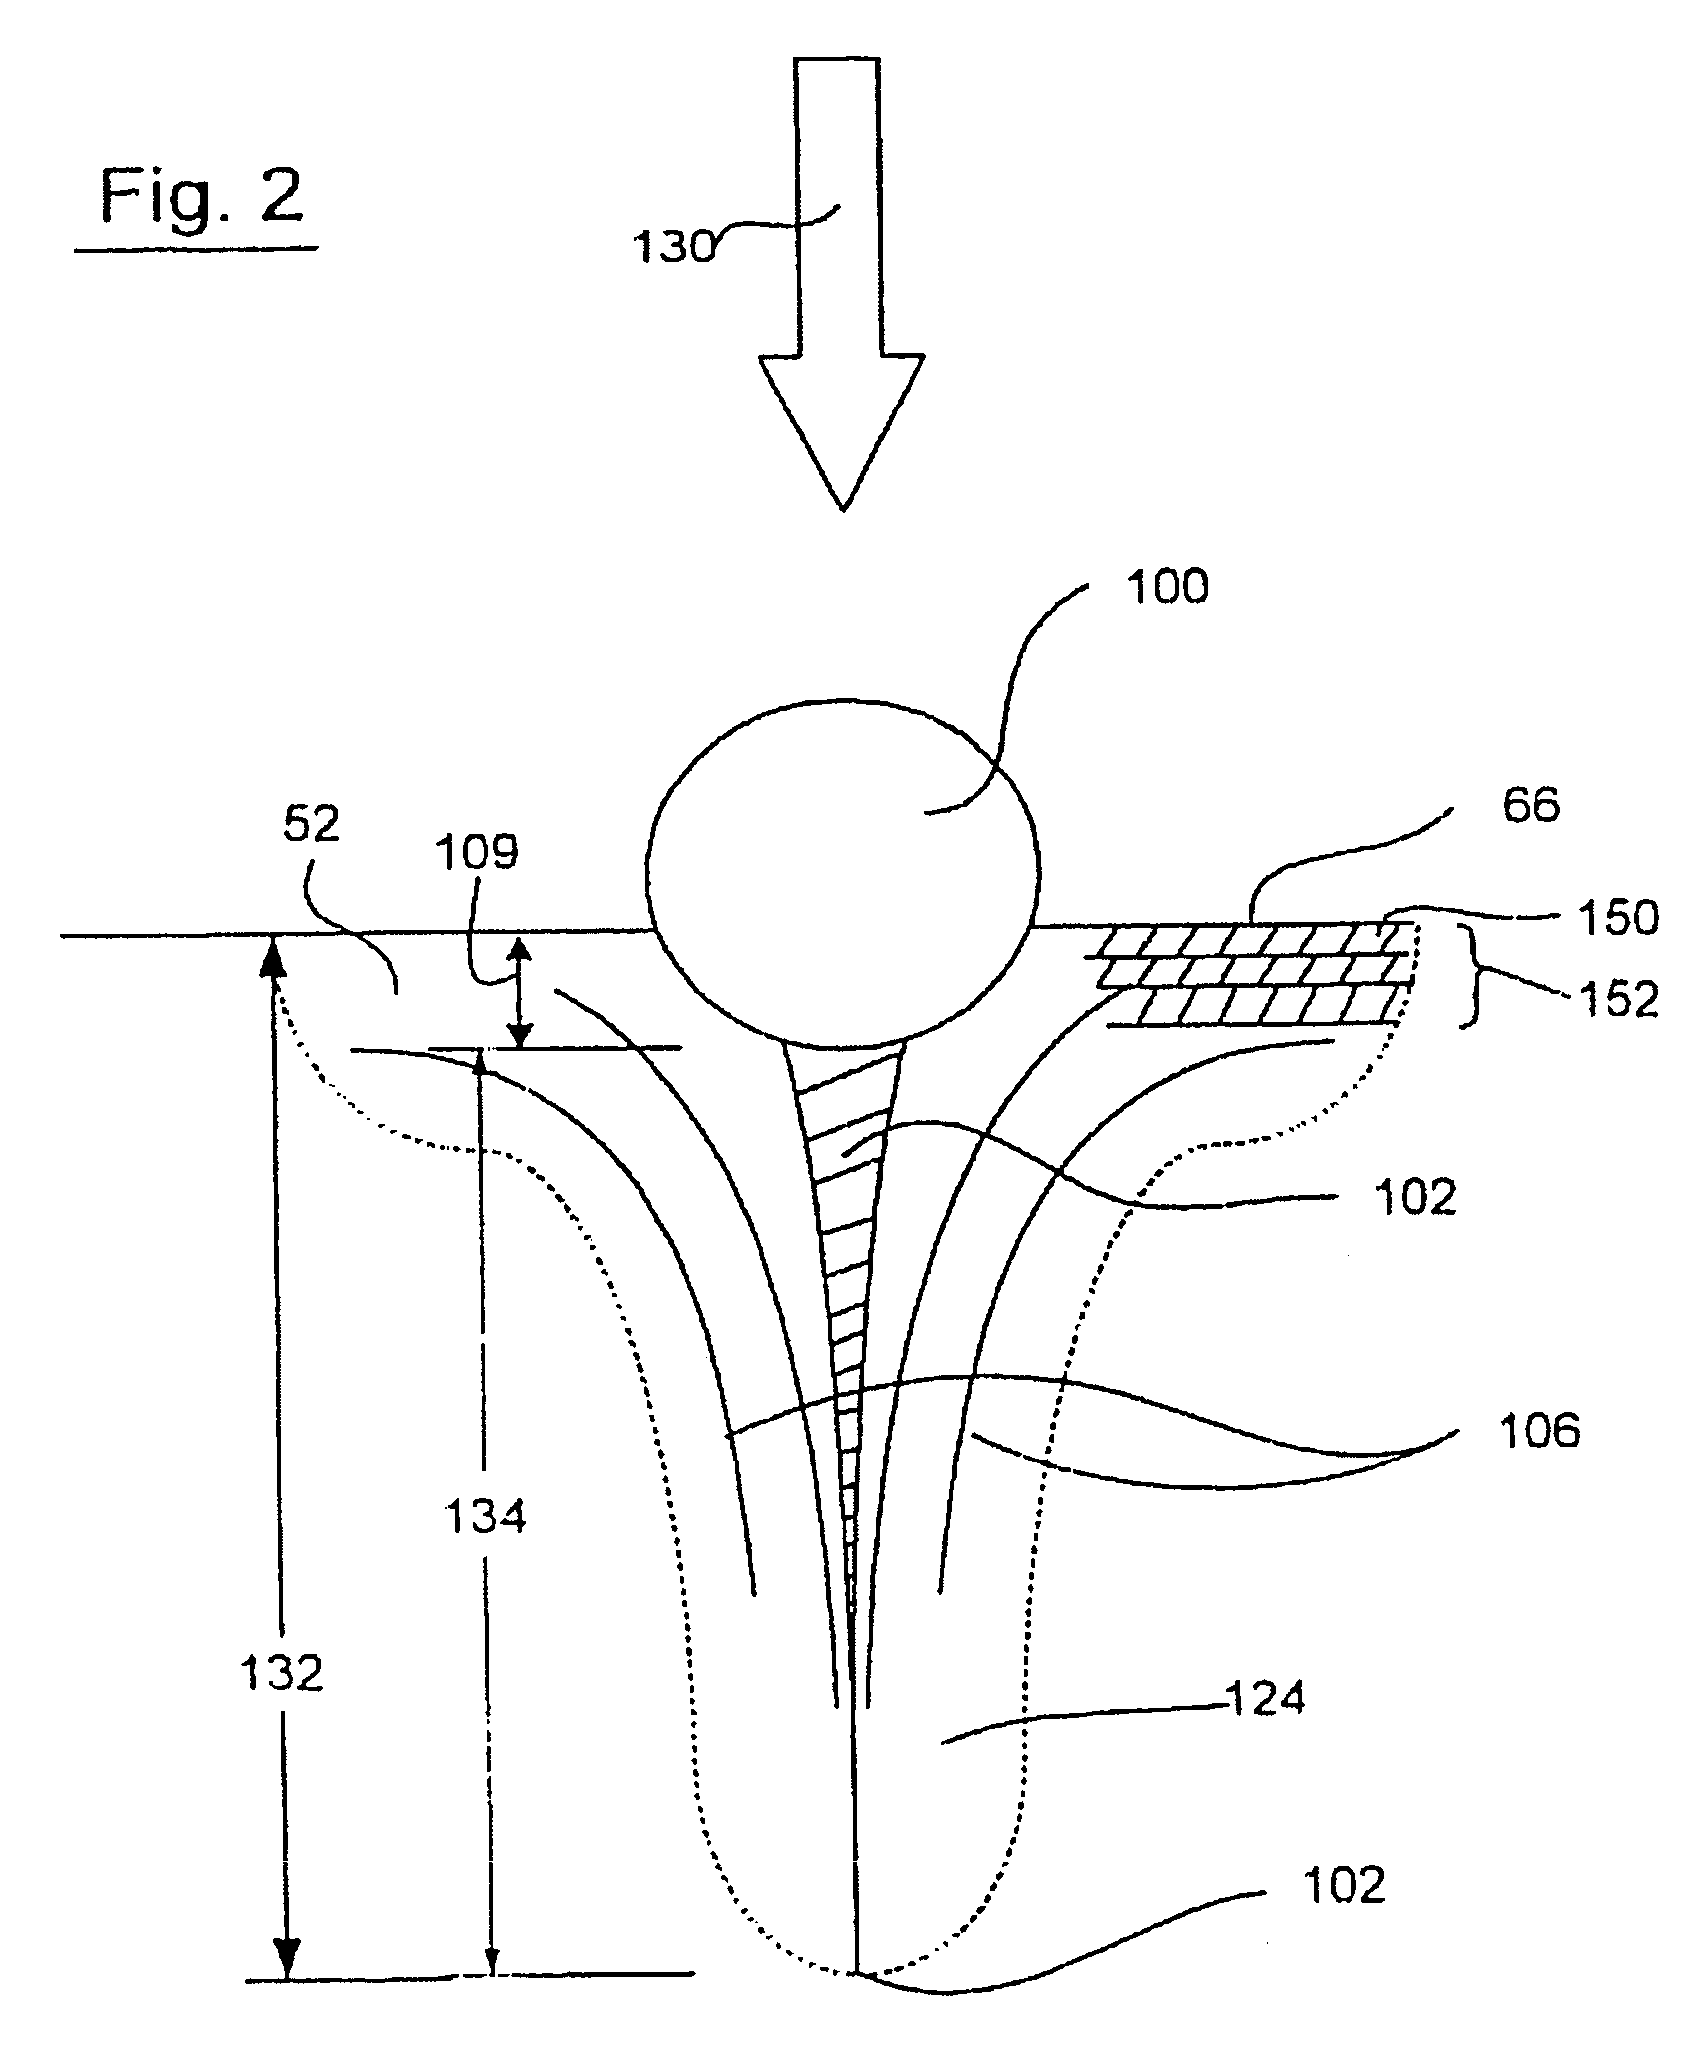 Impact excavation system and method